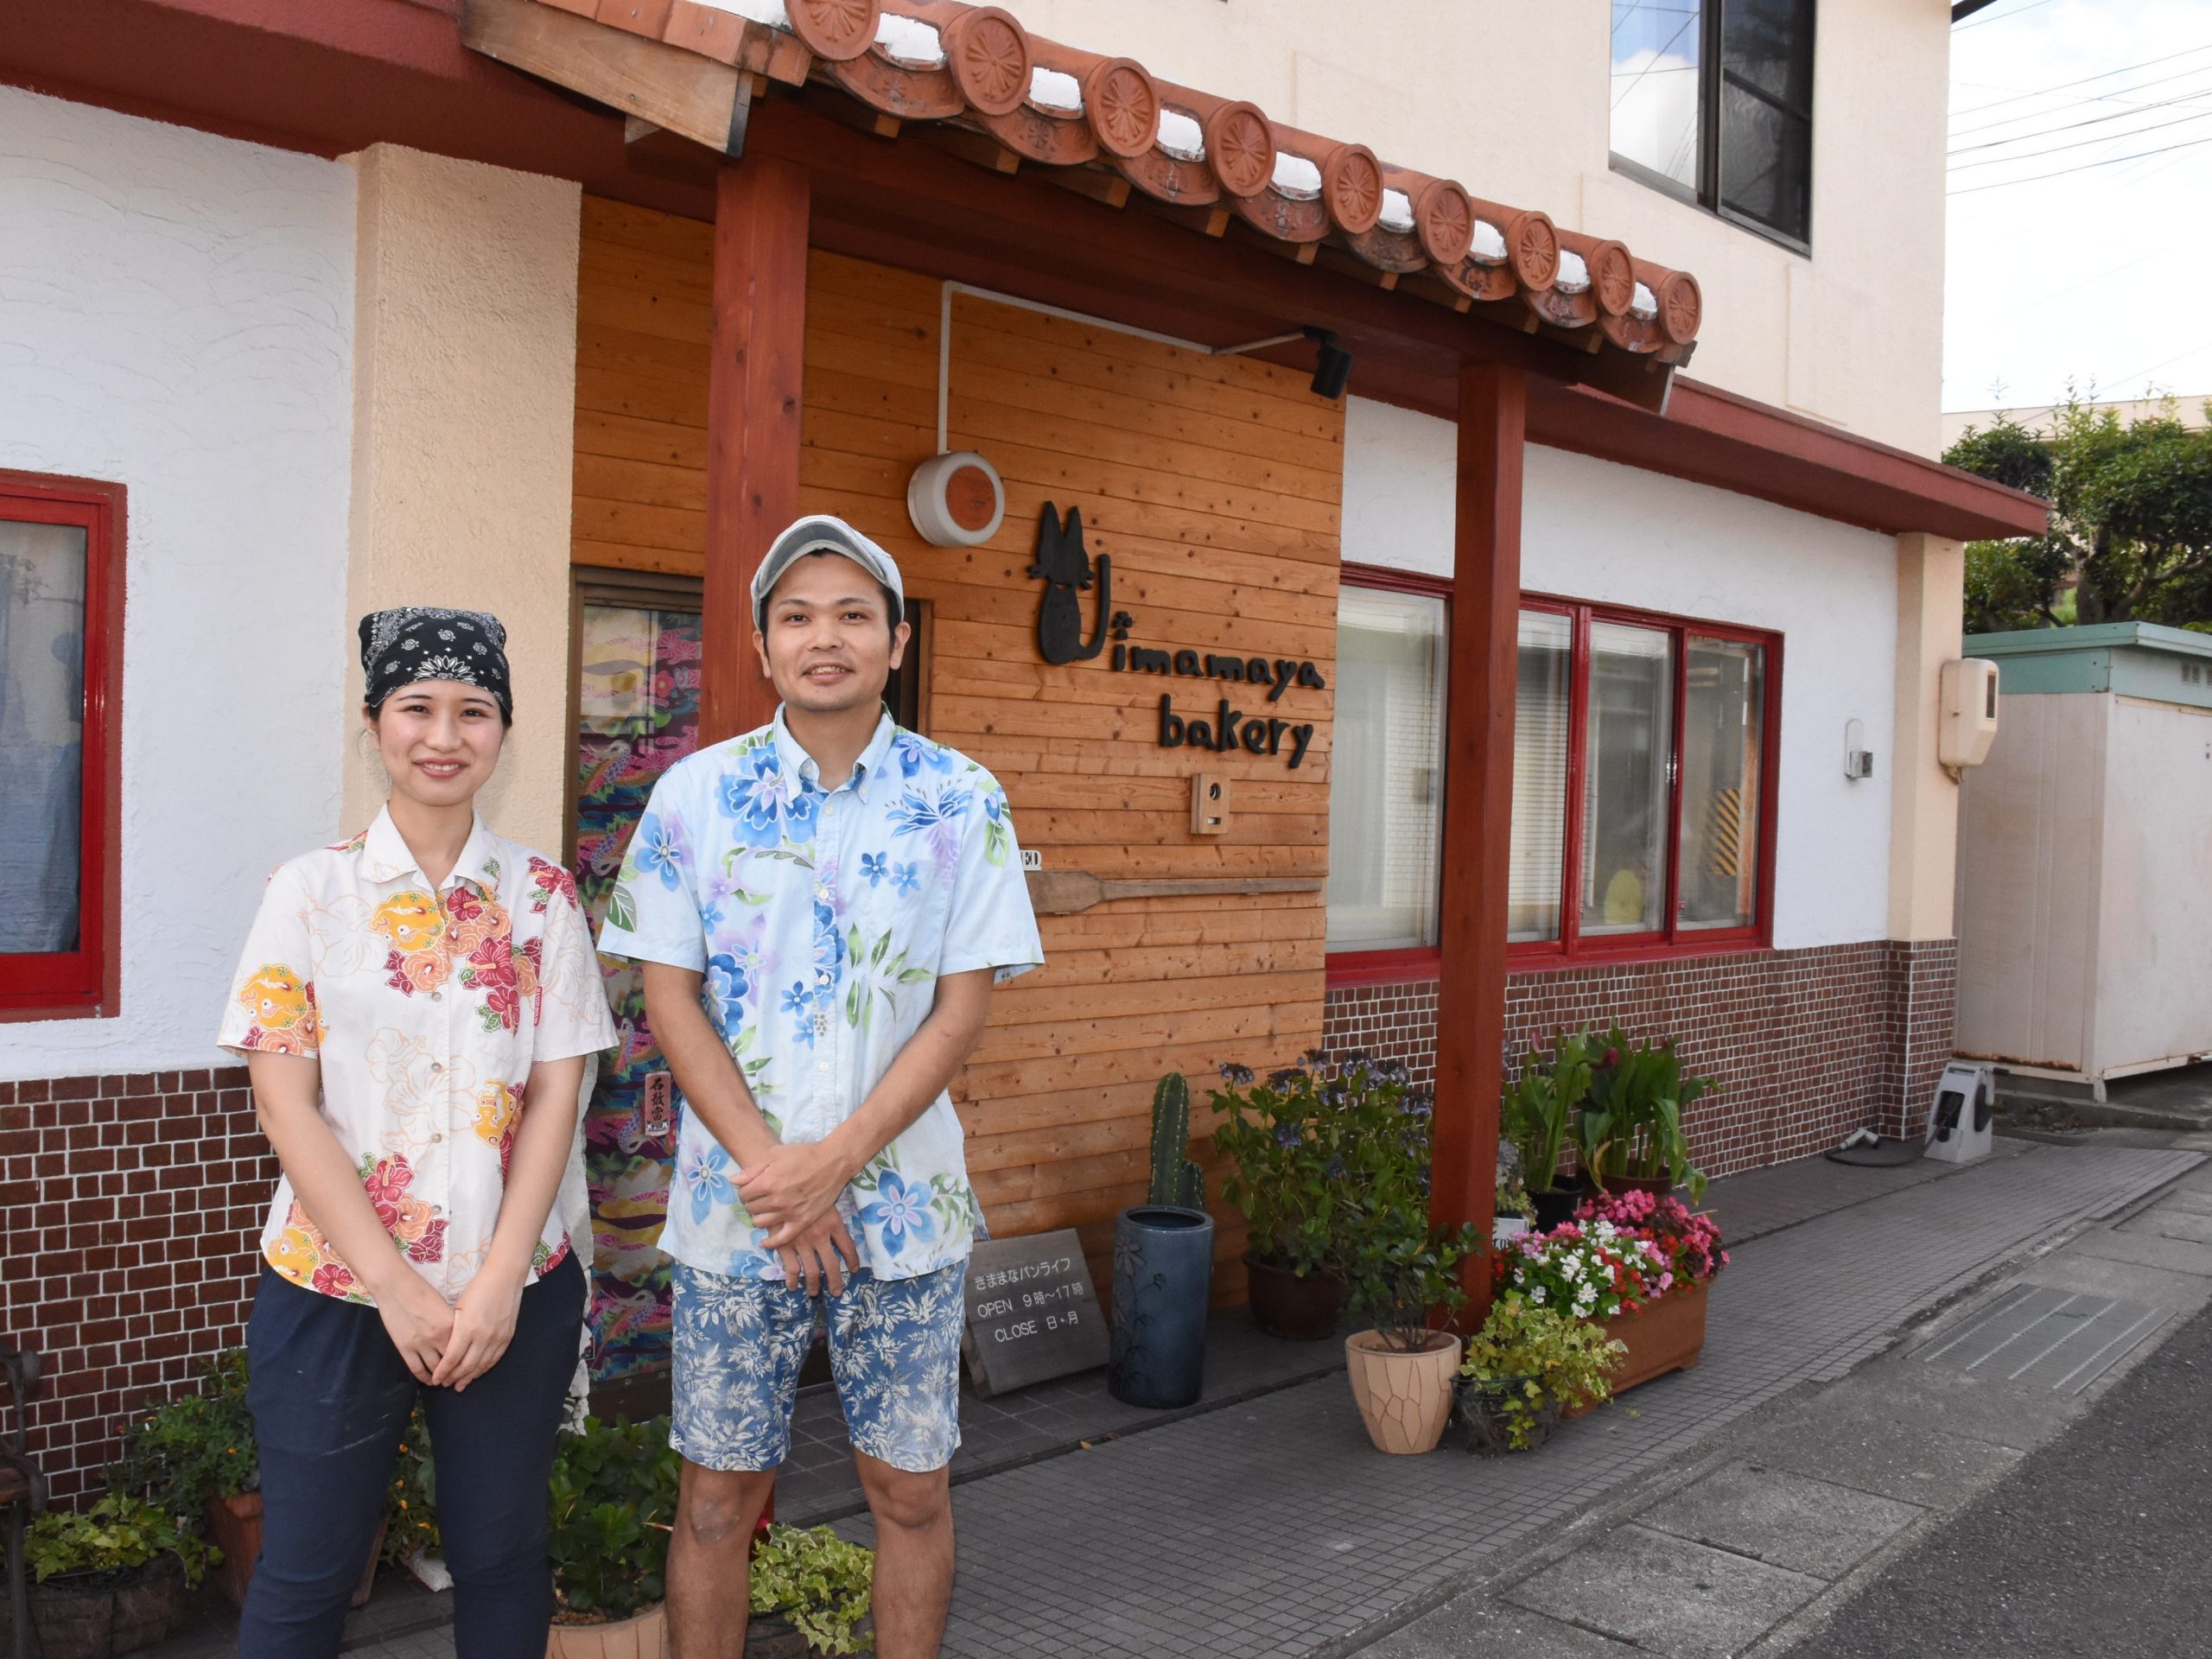 Yuichi Nomura and his wife smiling in front of the bakery they run in Wakiyama, Japan.